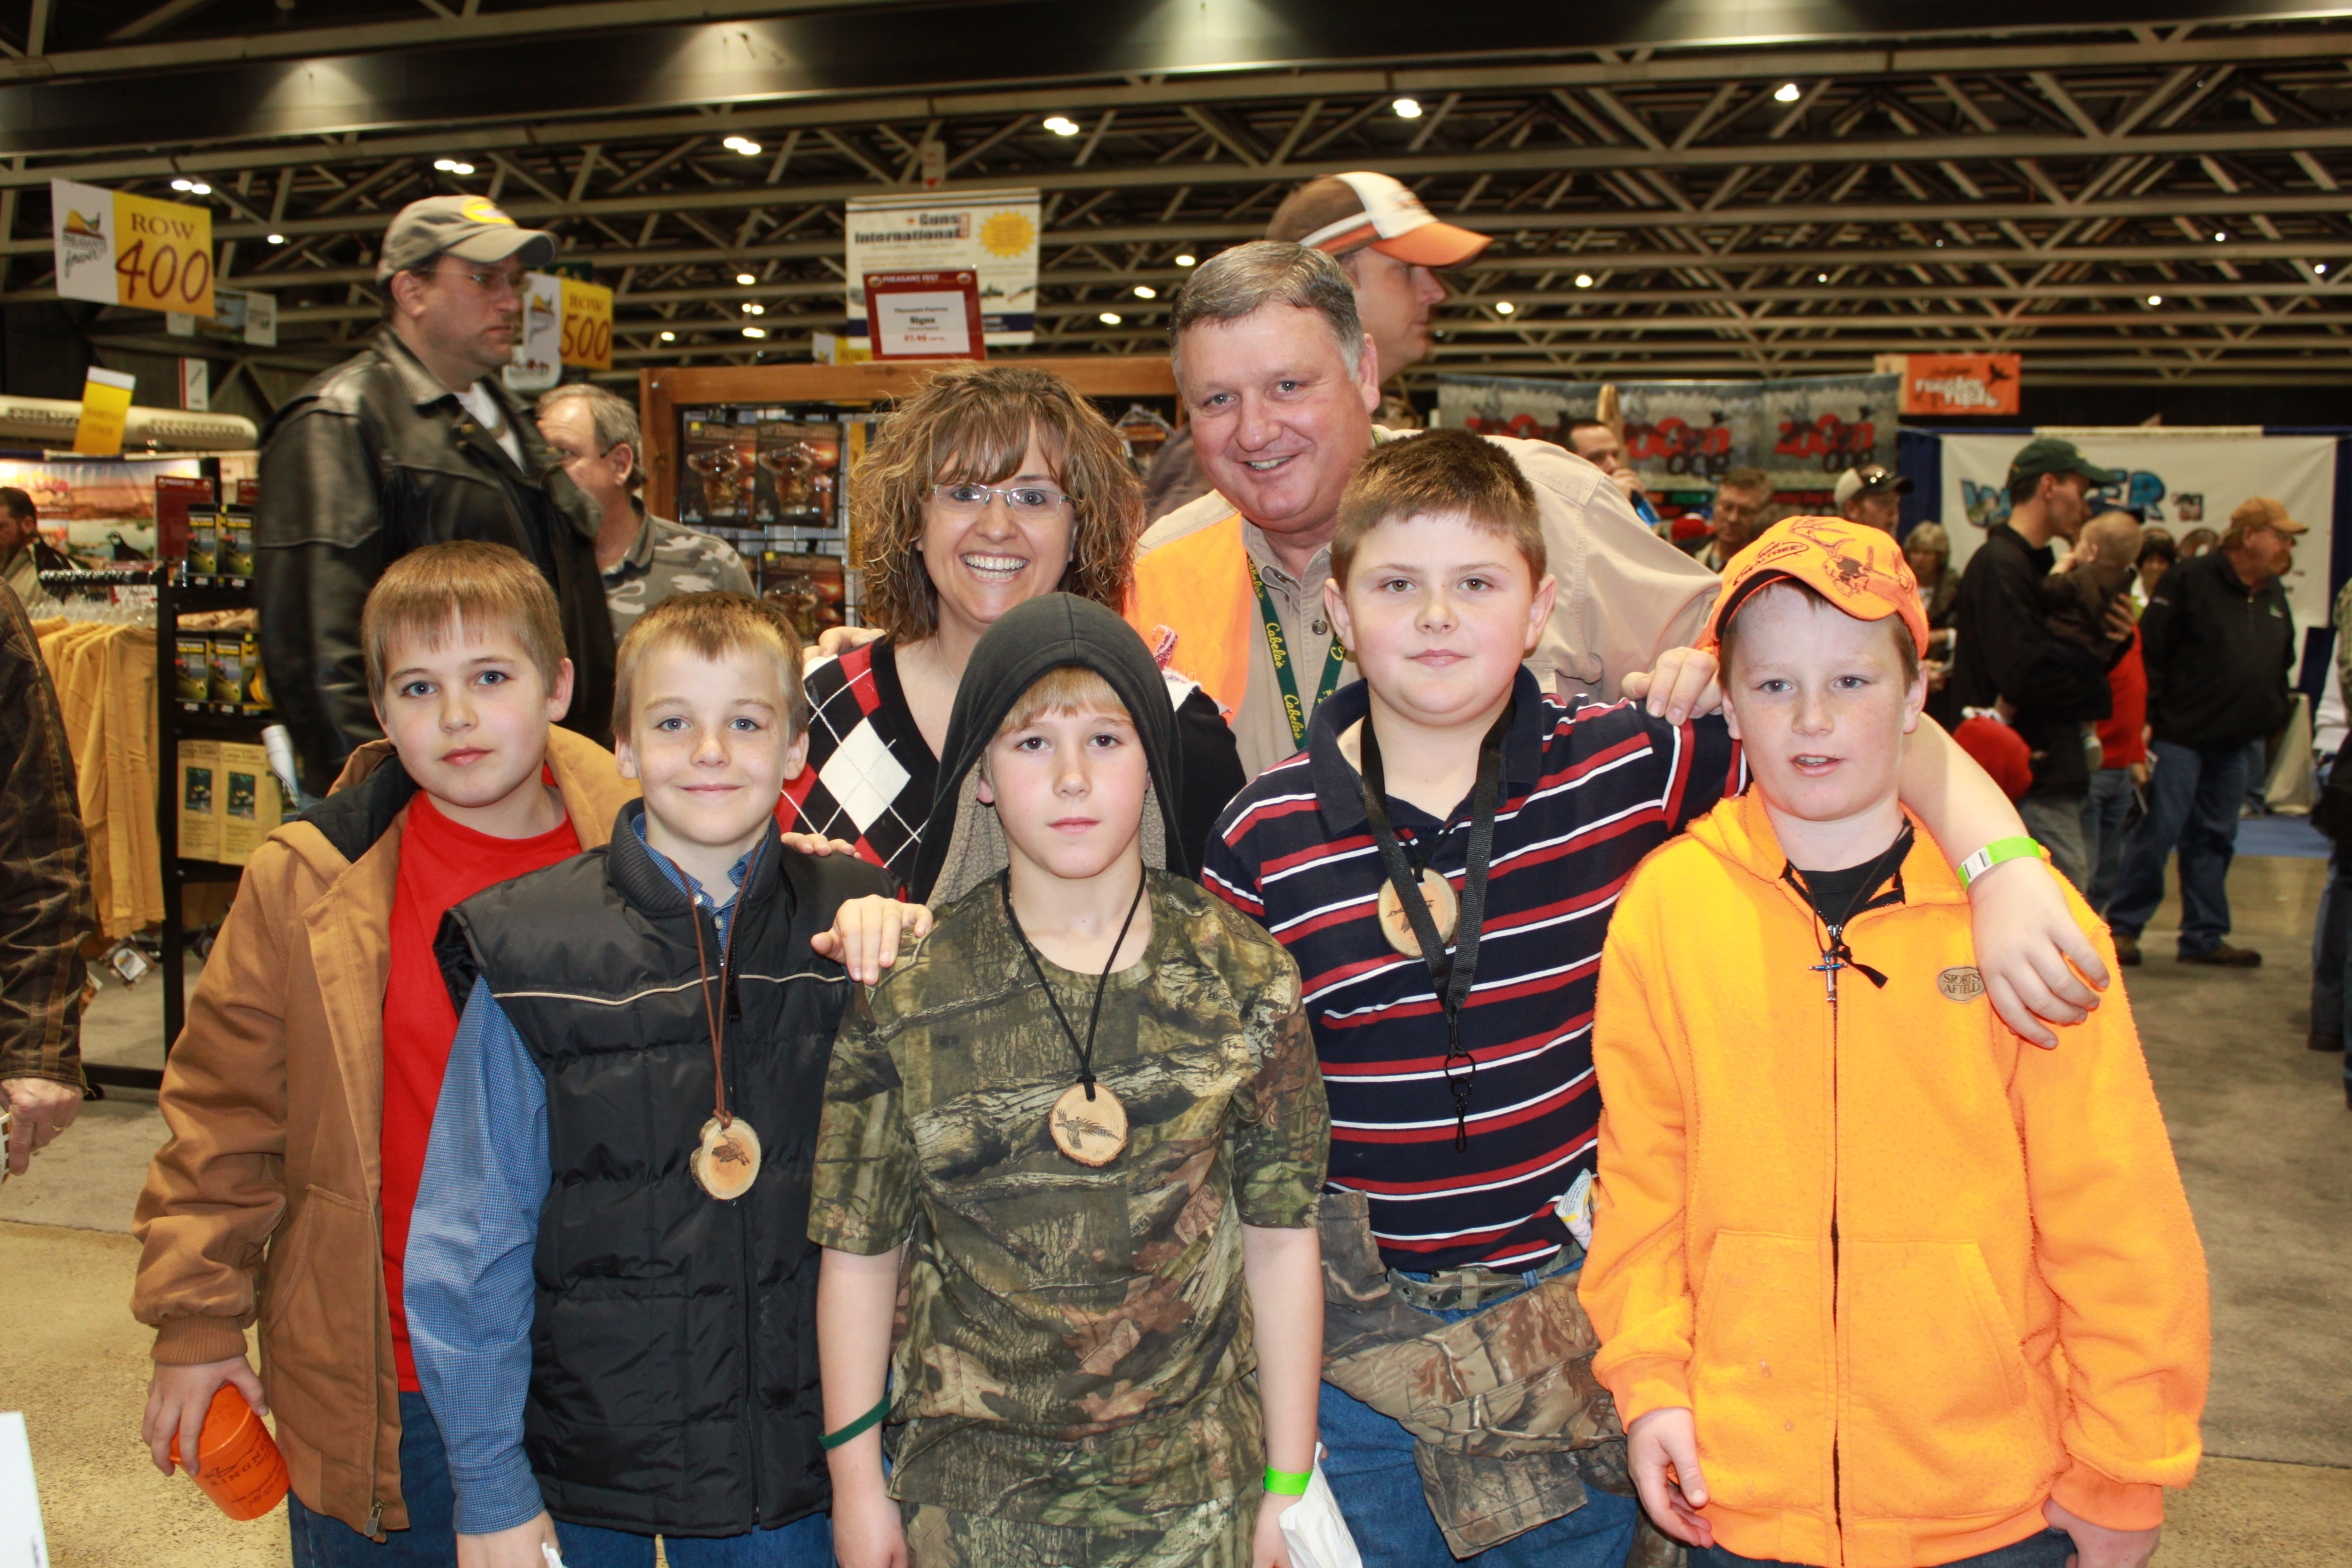 The Dill Family, who were recent first time hunters at Ringneck, stopped by the booth to say hi at Pheasant Fest 2012.